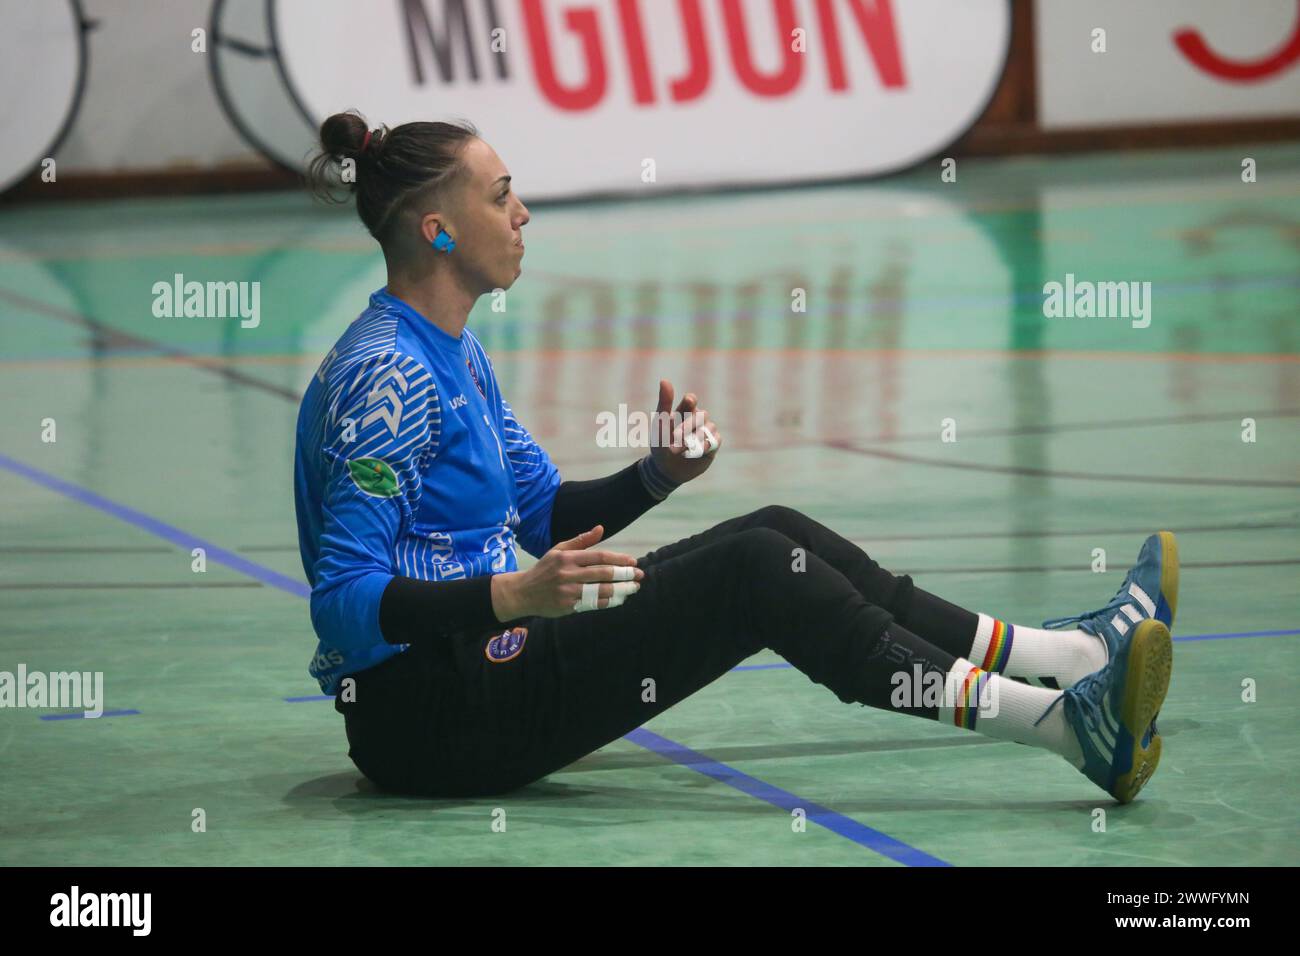 Gijón, Spain. 23rd Mar, 2024. The goalkeeper of Motive.co Gijón Balonmano La Calzada, Raquel Álvarez (1) regrets a chance during the 22nd Matchday of the Liga Guerreras Iberdrola 2023-24 between Motive.co Gijón Balonmano La Causeway and the KH-7 BM. Granollers, on March 23, 2024, at the La Arena Pavilion, in Gijón, Spain. (Photo by Alberto Brevers/Pacific Press) Credit: Pacific Press Media Production Corp./Alamy Live News Stock Photo